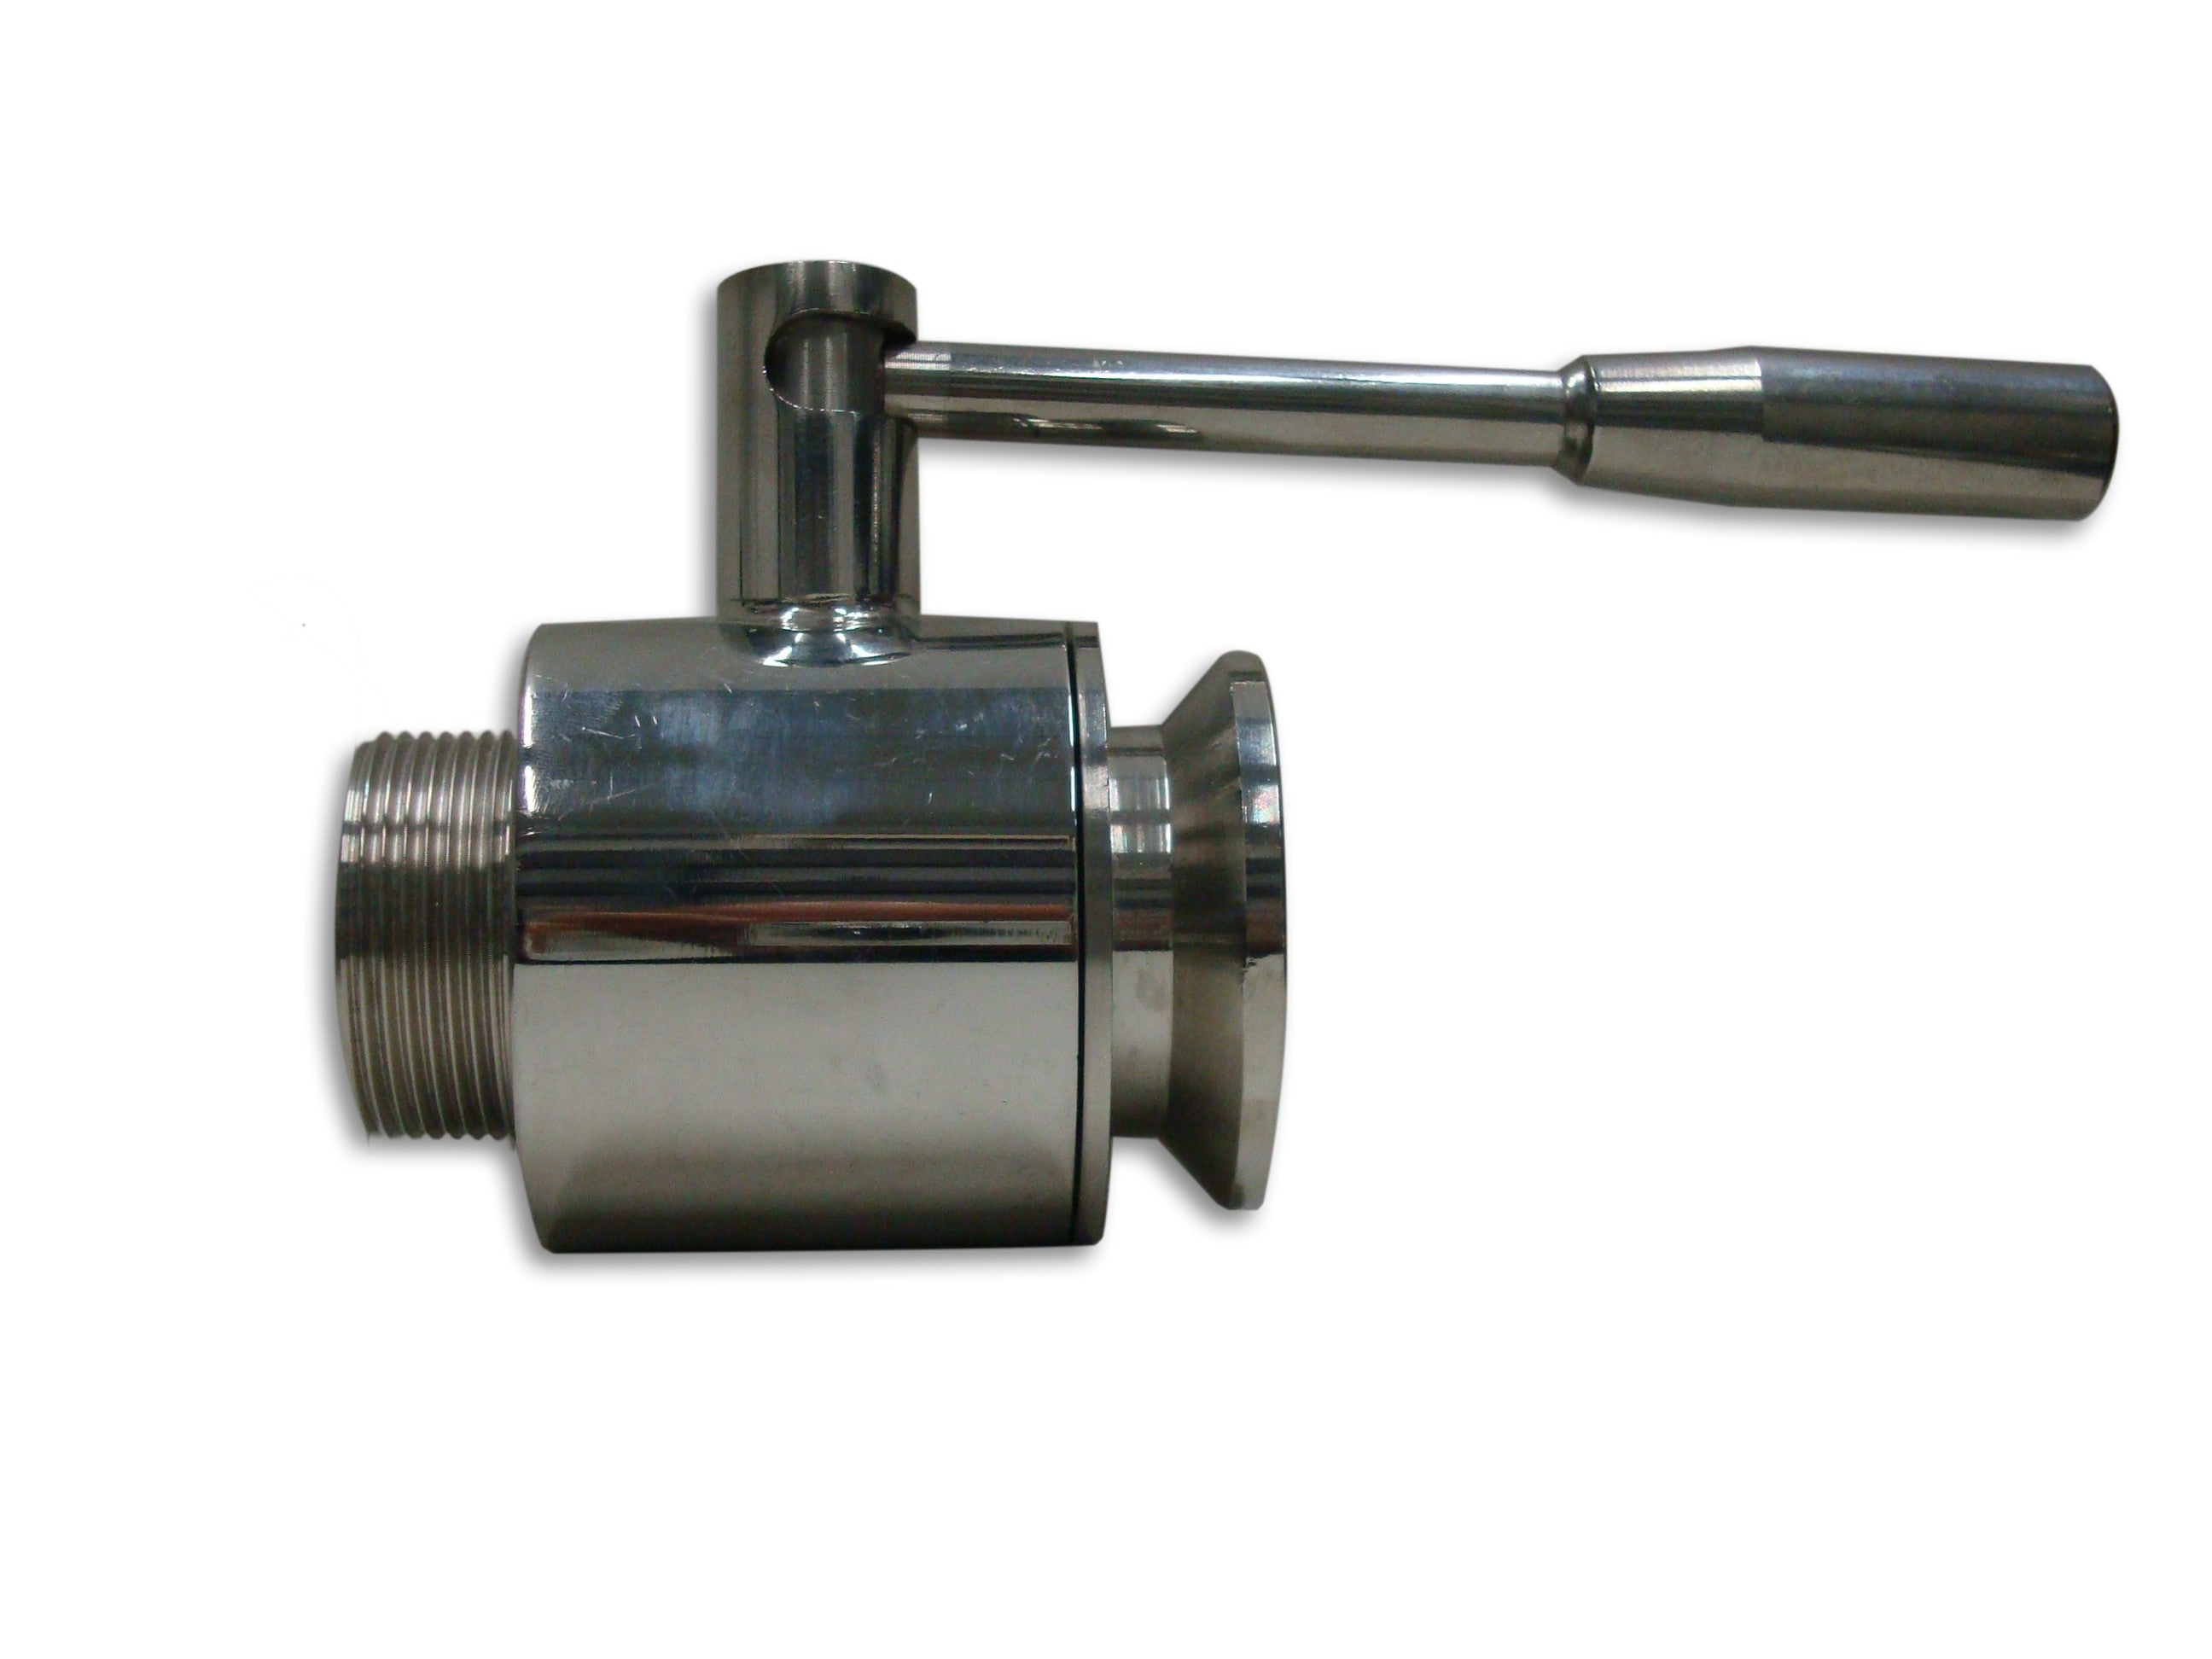 Stainless steel ball valve 1" with connection 40 garolla